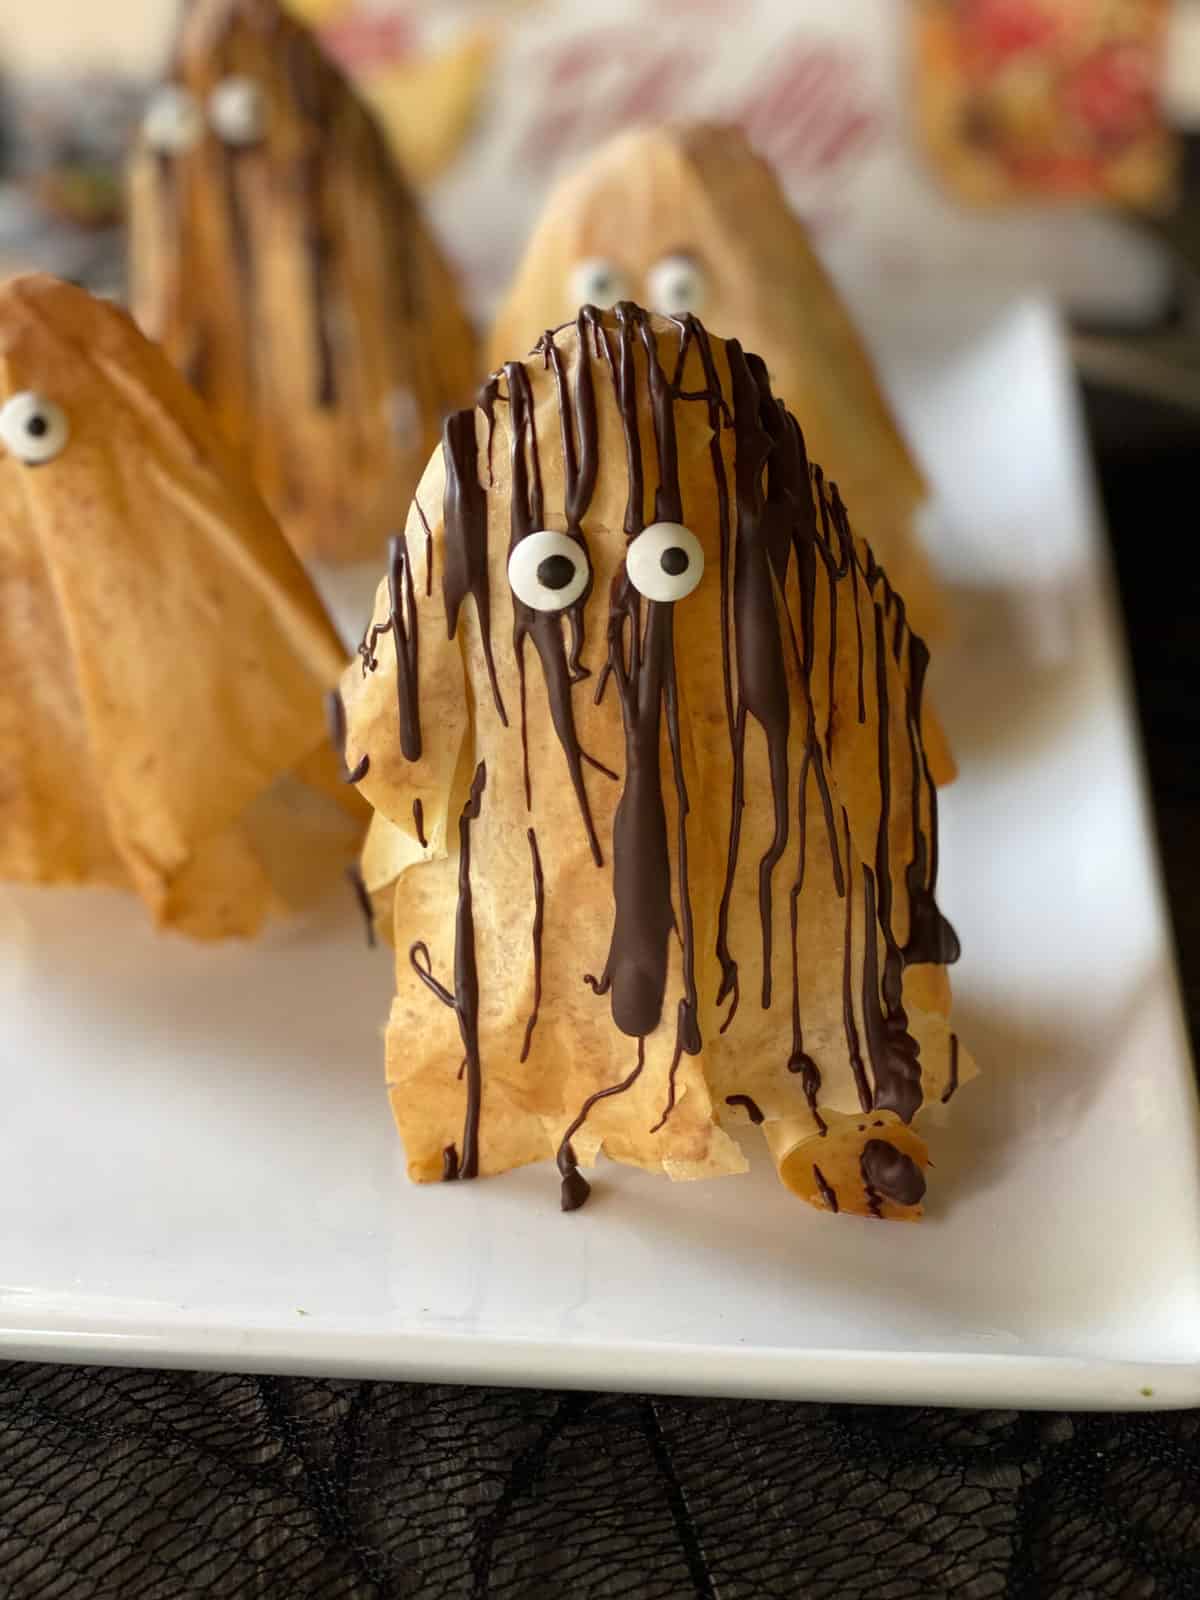 Phyllo pastry ghosts